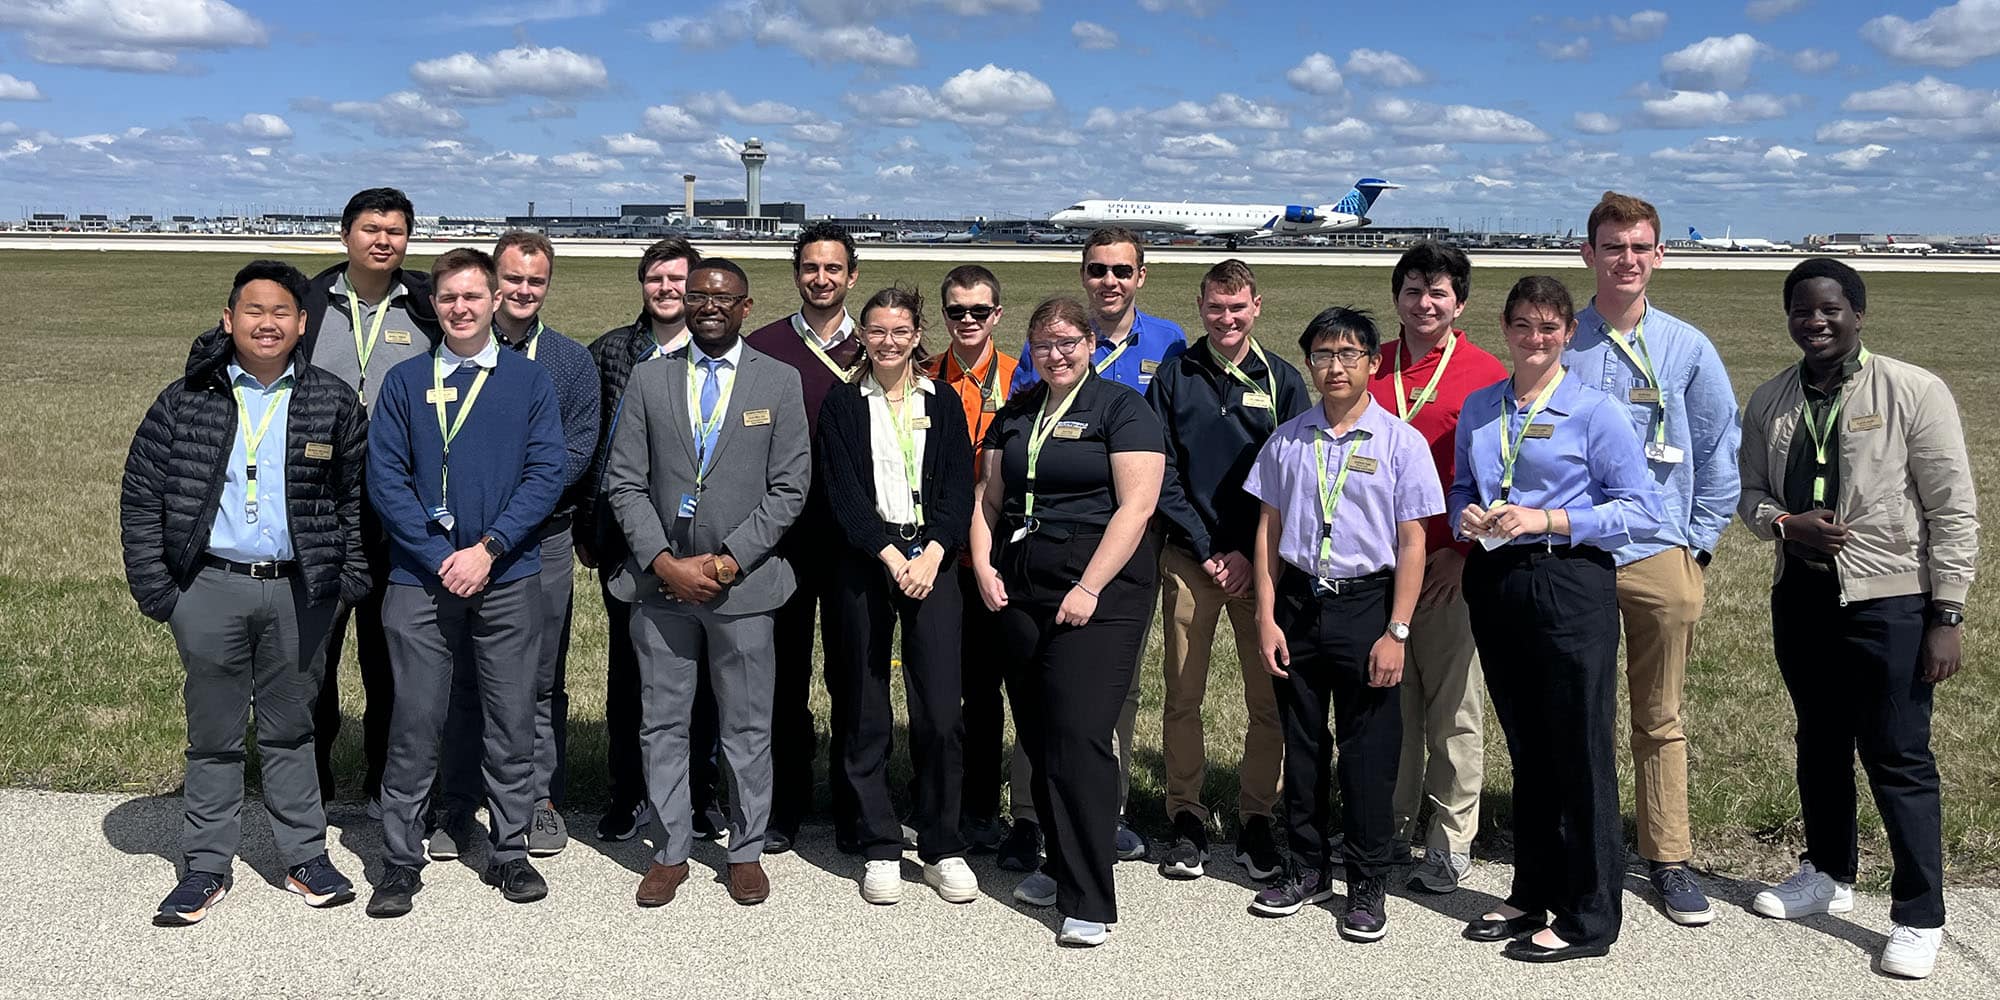 Seventeen students in business wear, with yellow lanyards, pose in the sun in front of a tarmac, a flight control tower in the distance.